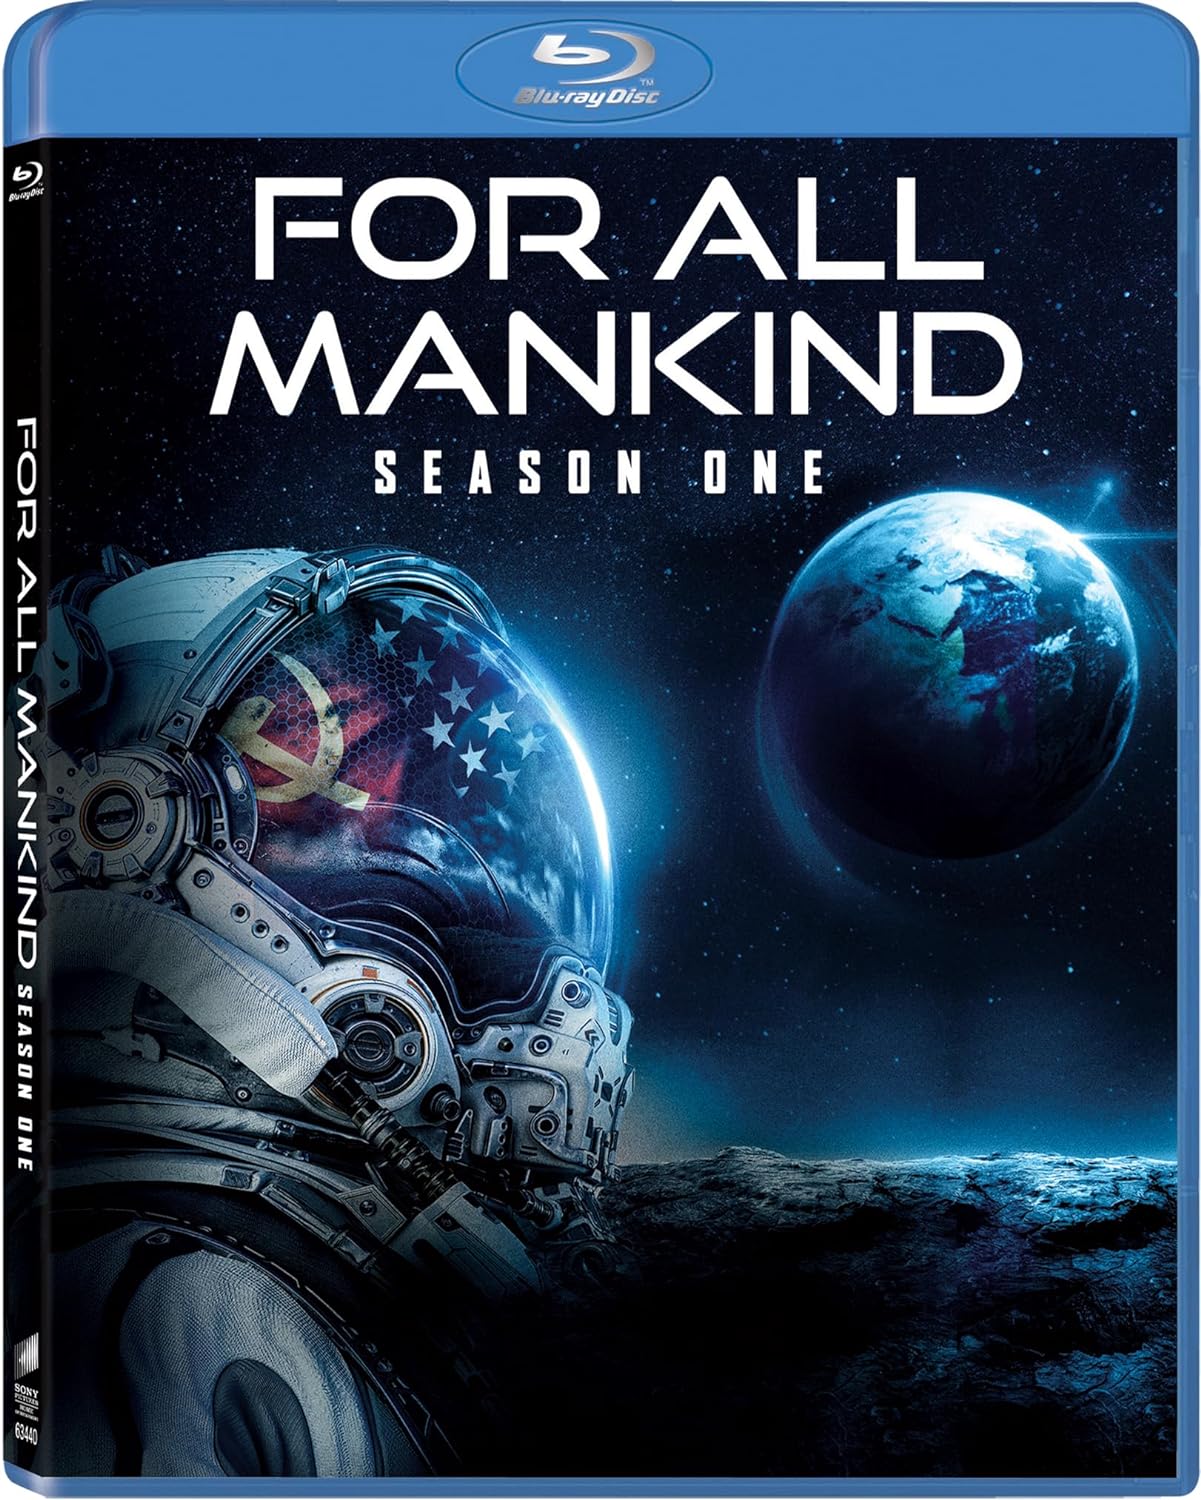 For All Mankind: Season 1 Blu-ray with Slipcover (Sony U.S.)